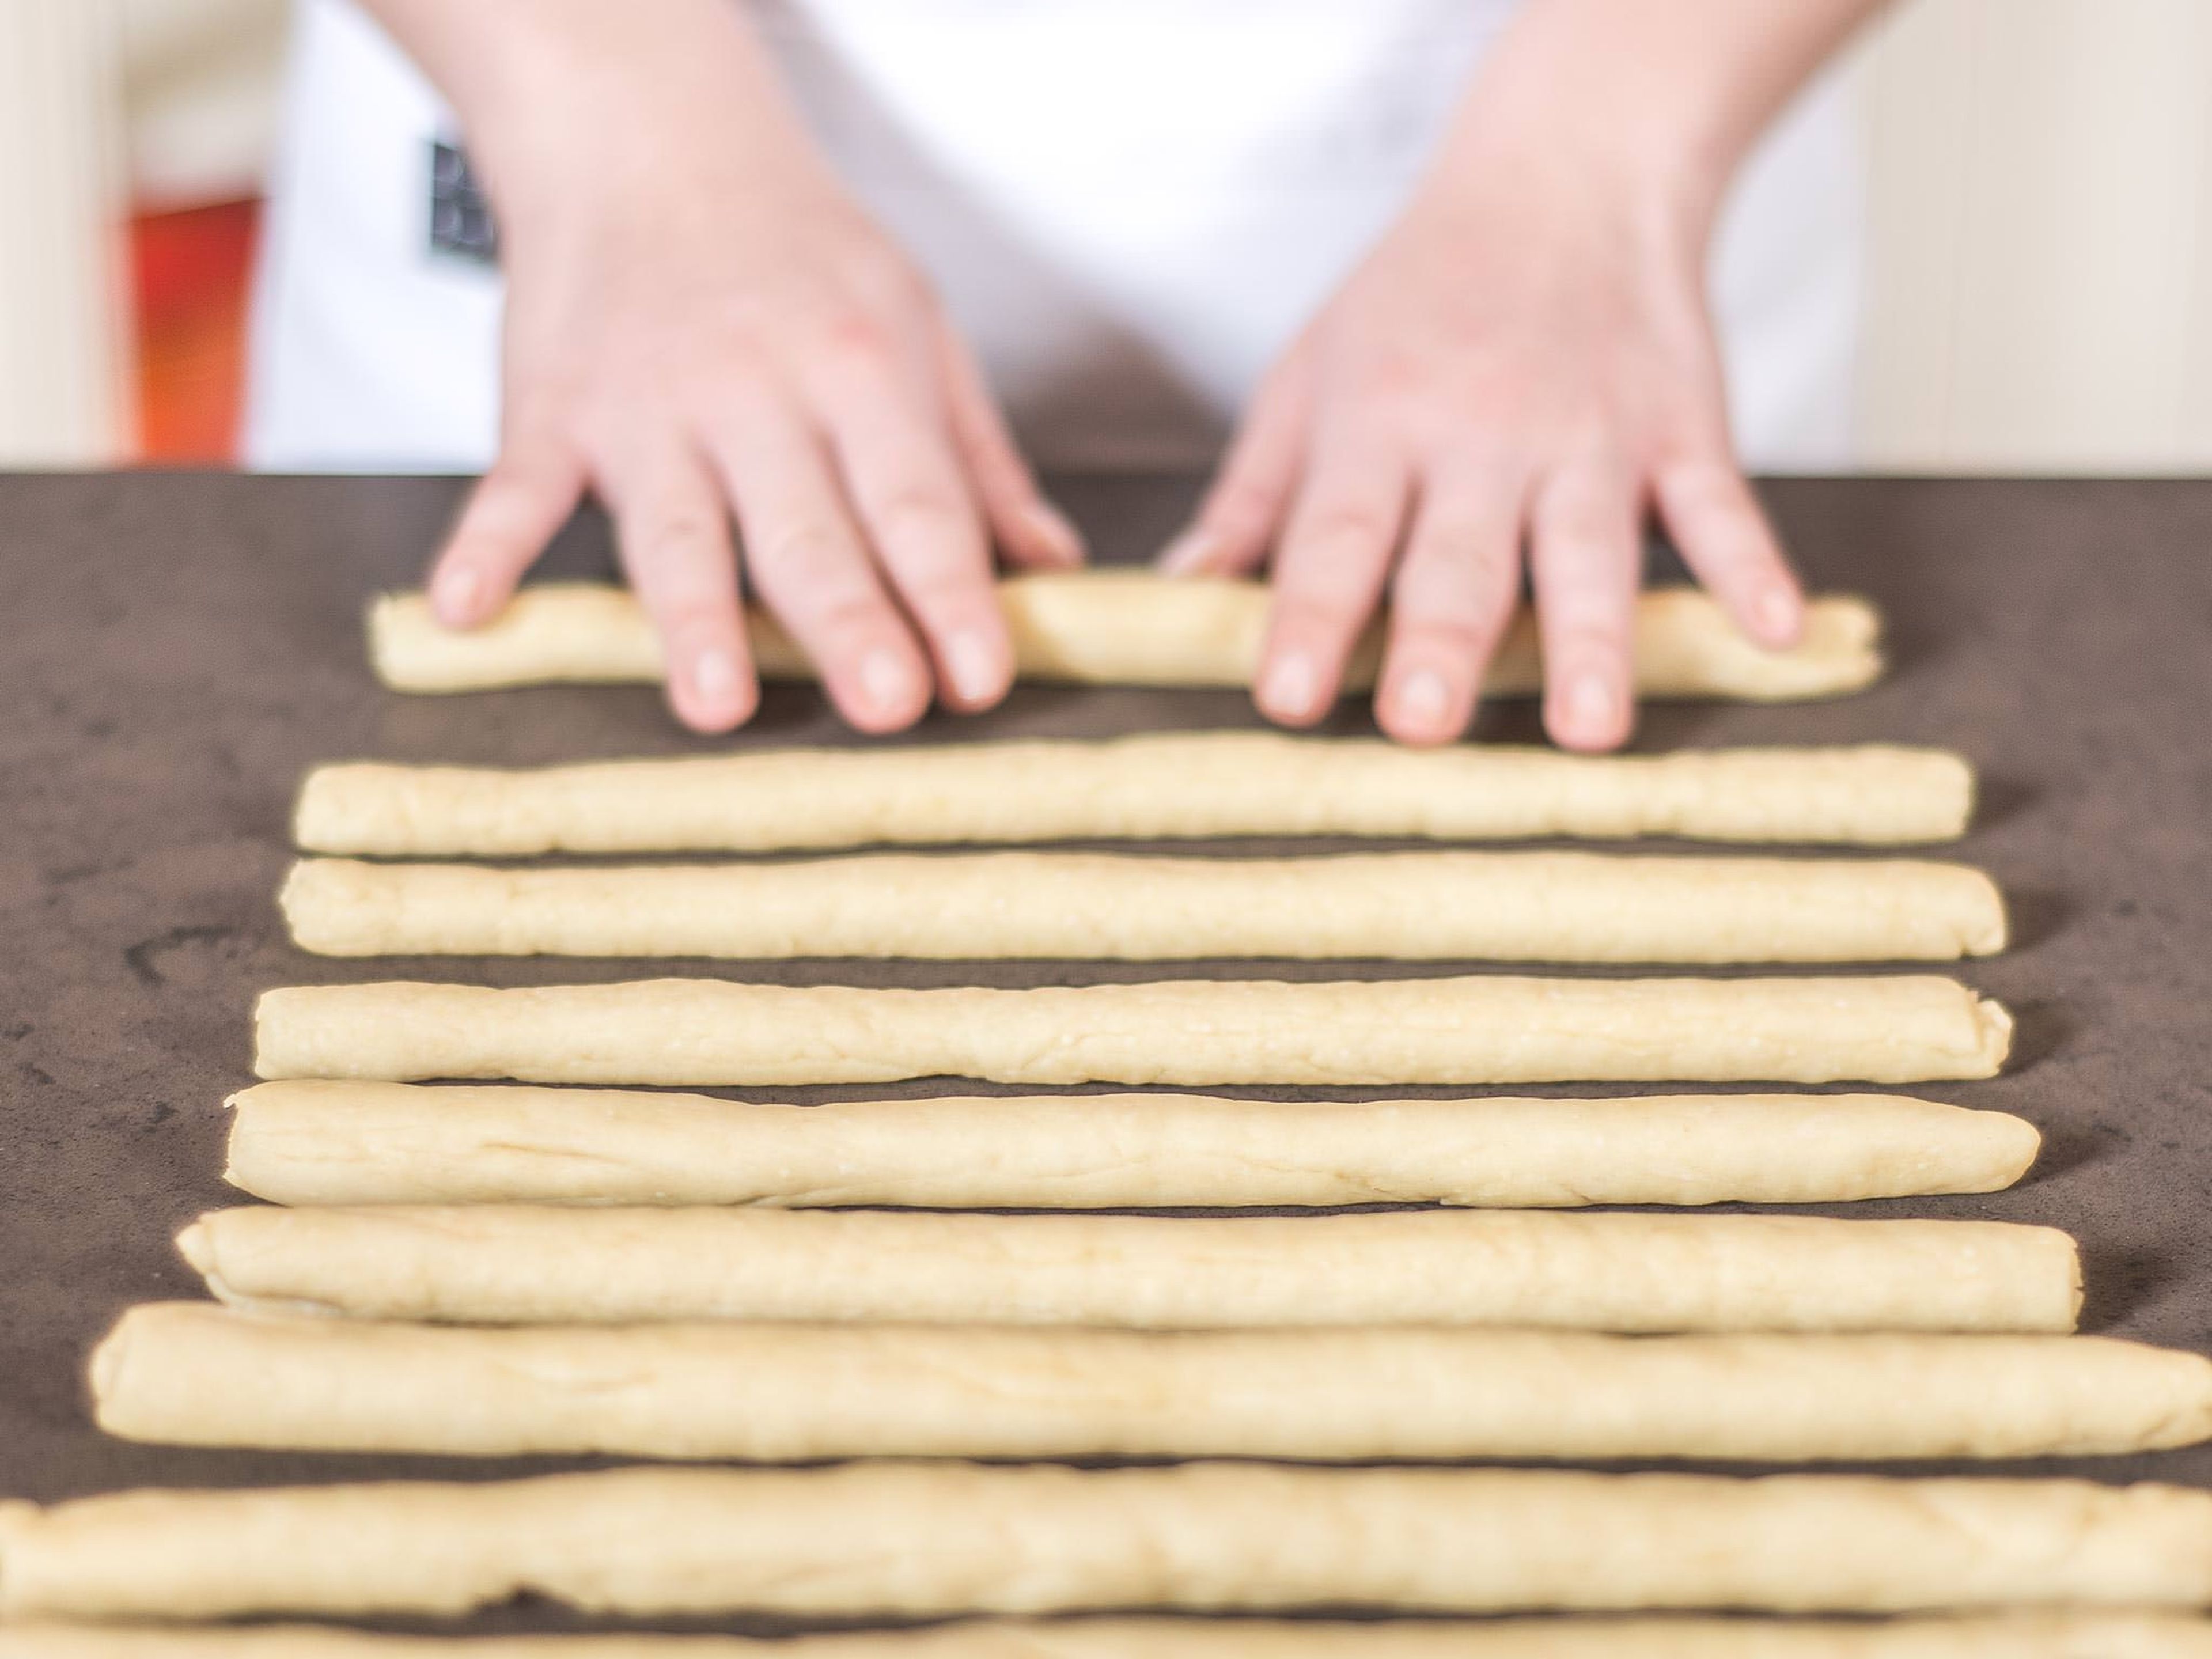 Roll into thin sticks on a work surface. One batch of dough should be enough for 10 to 15 grissini.